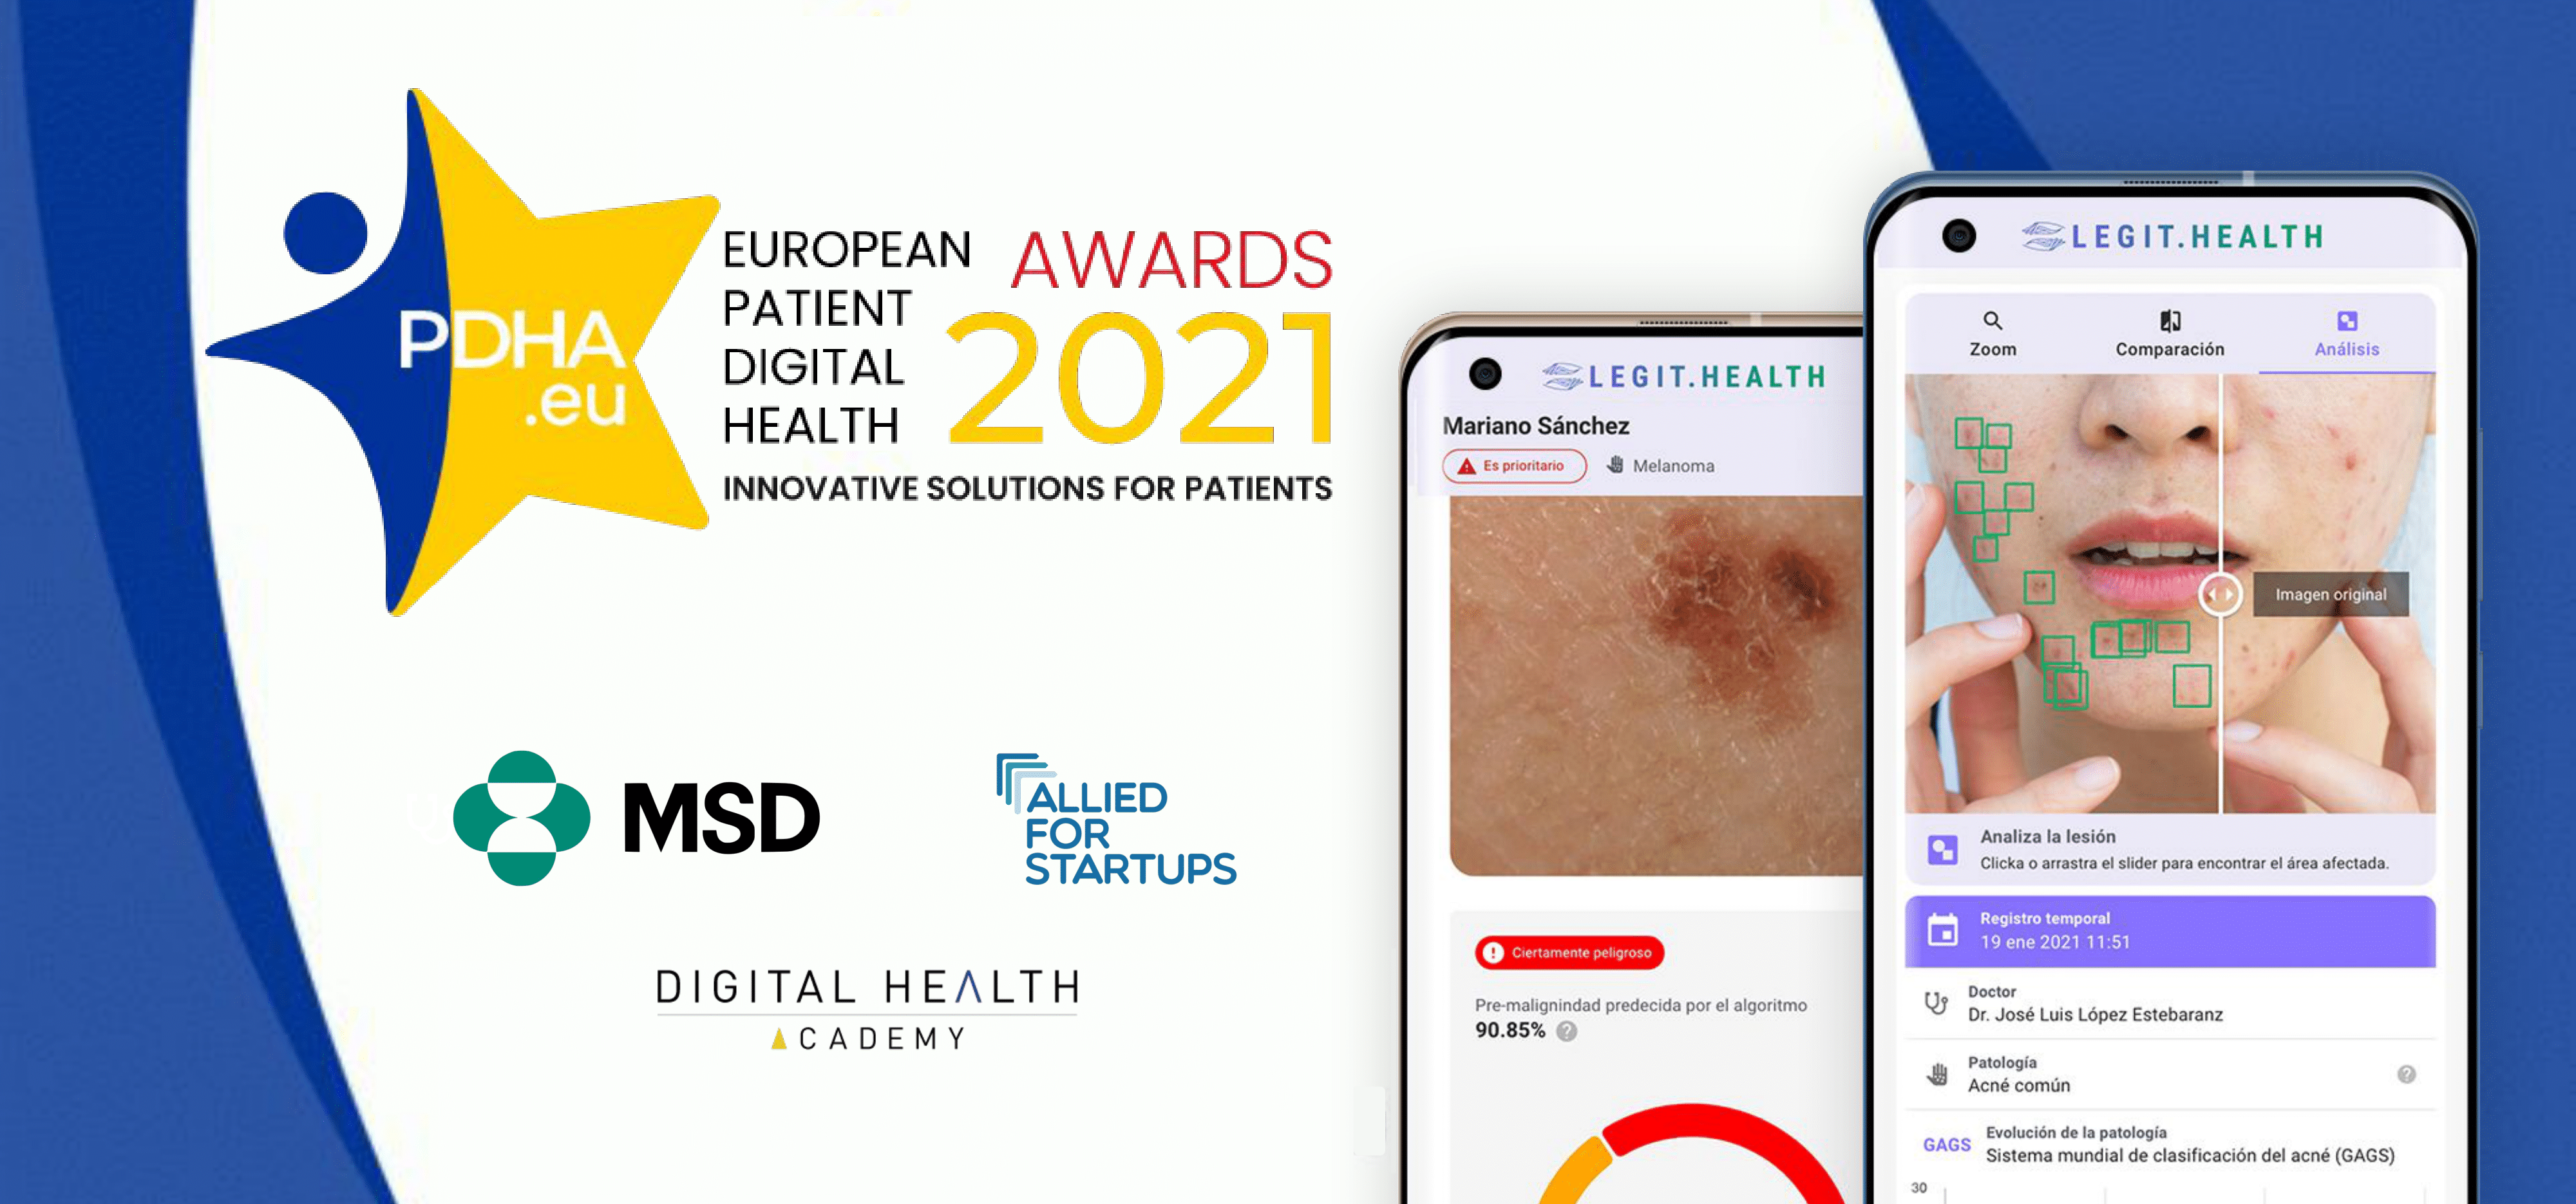 Legit.Health awarded at the European Patient Digital Health Awards 2021 by MSD